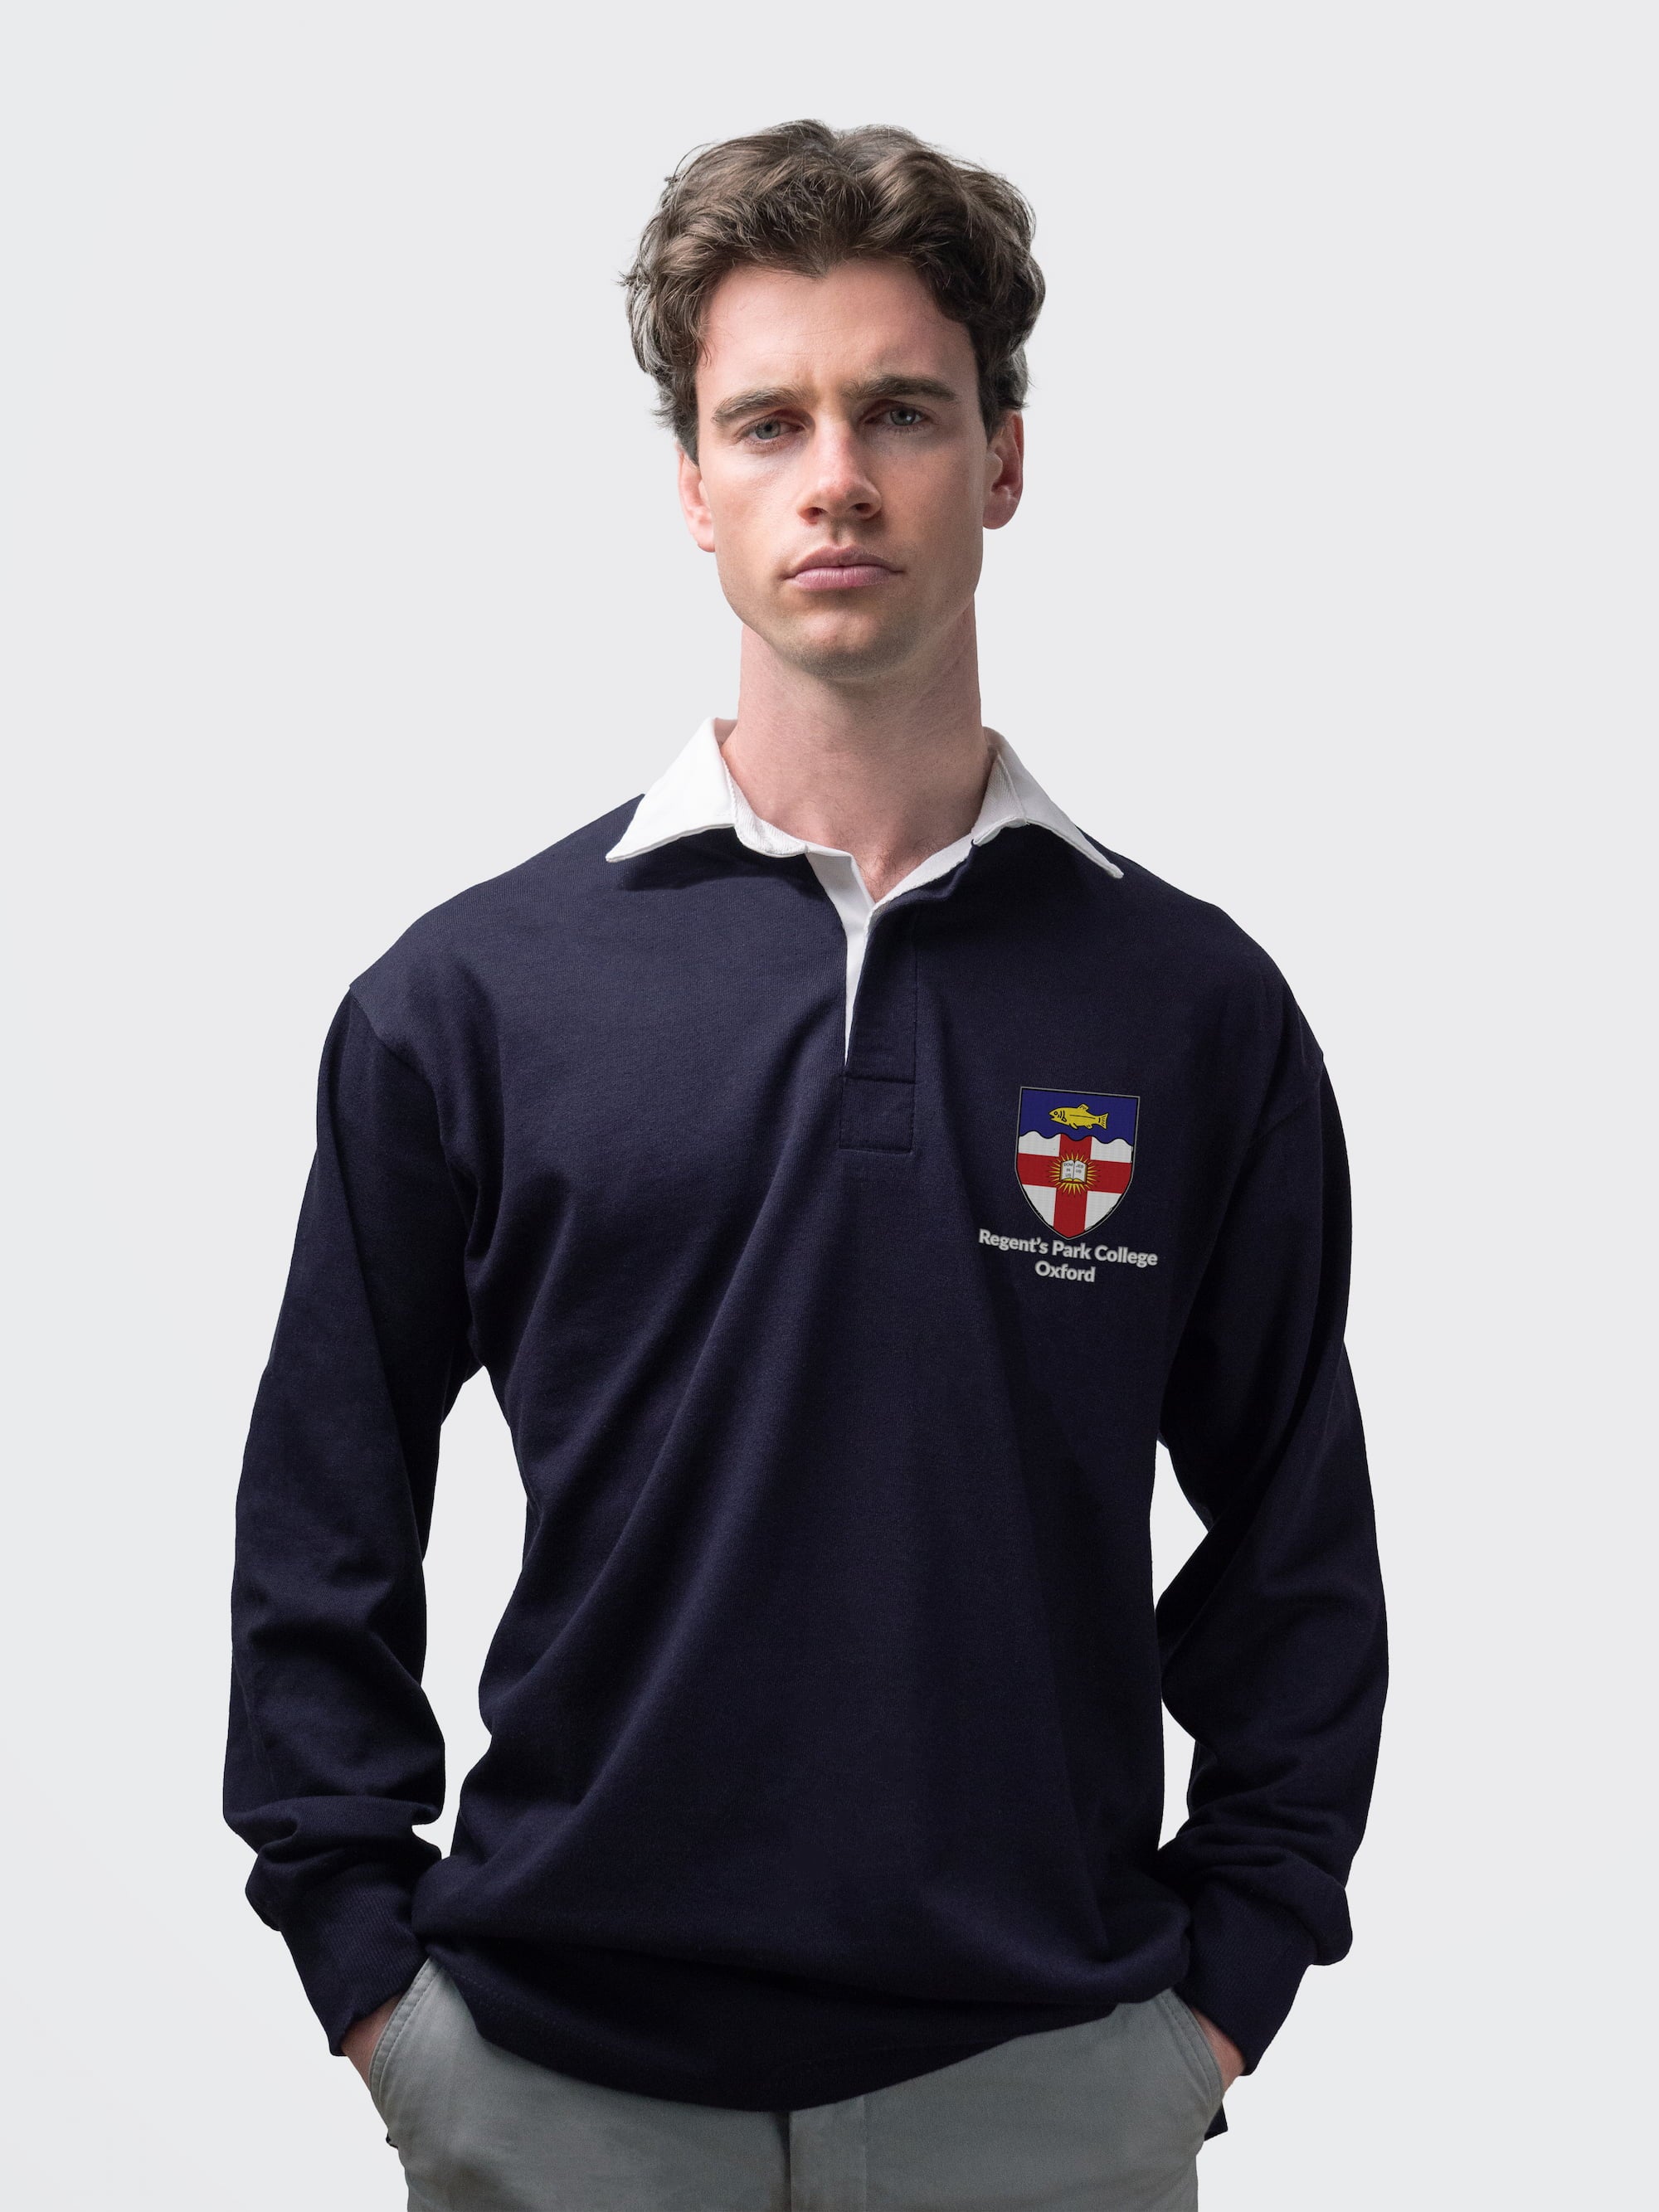 Regent's Park student wearing an embroidered mens rugby shirt in navy